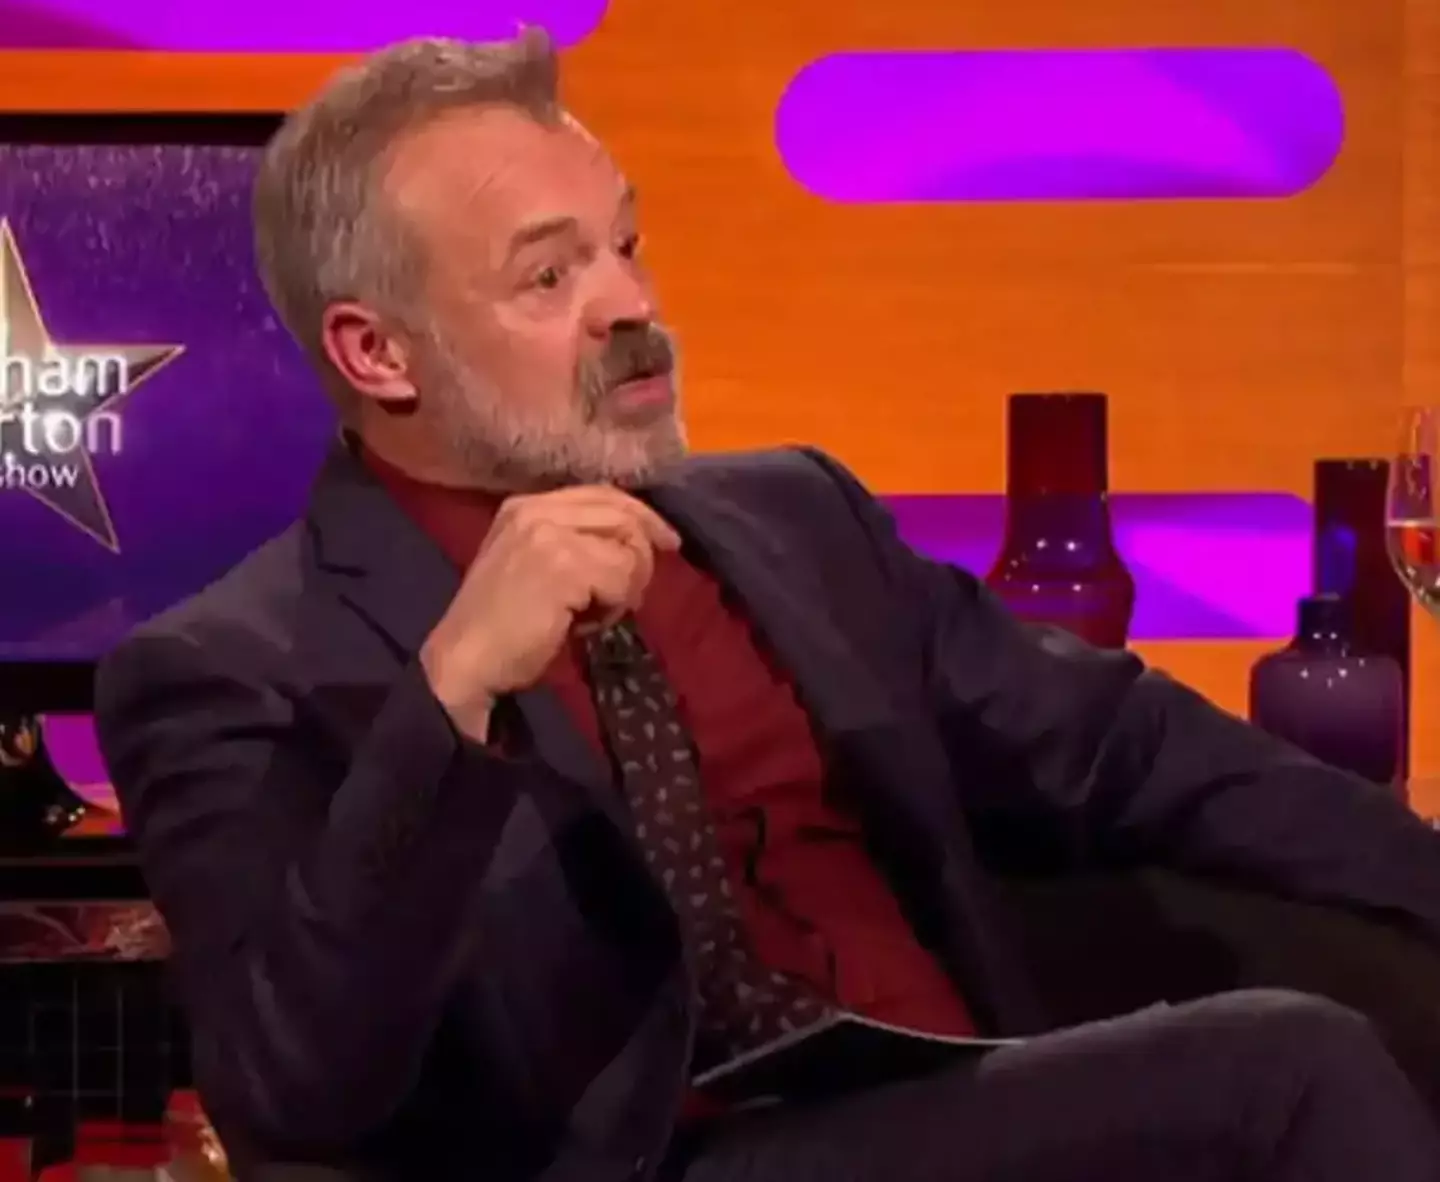 Graham Norton has interviewed some of the world's biggest stars in film and music.